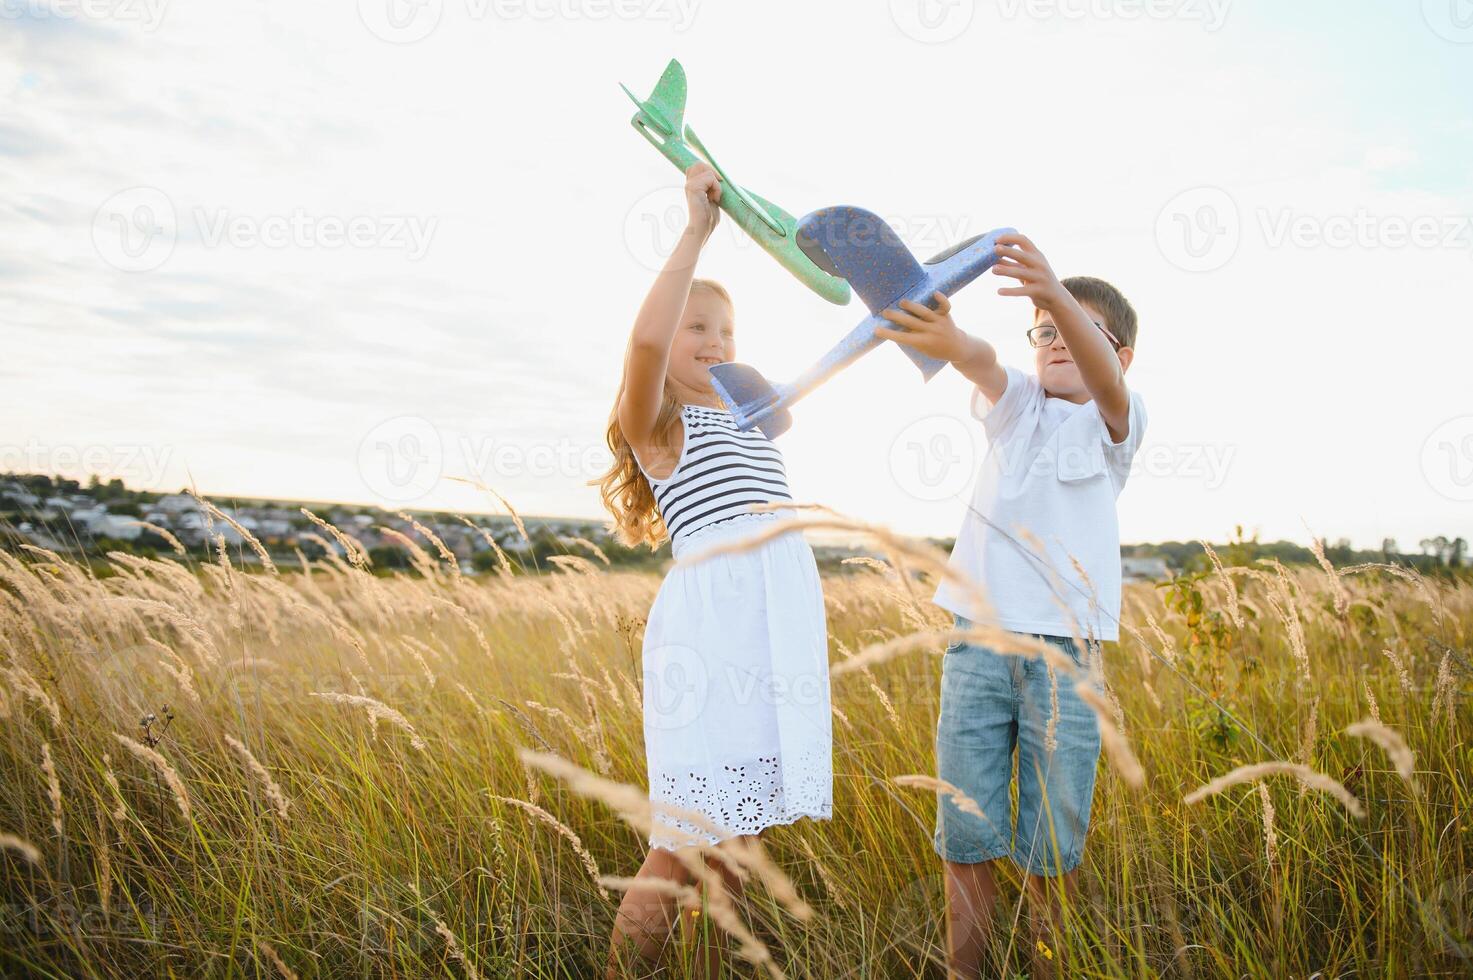 Running boy and girl holding two green and blue airplanes toy in the field during summer sunny day photo